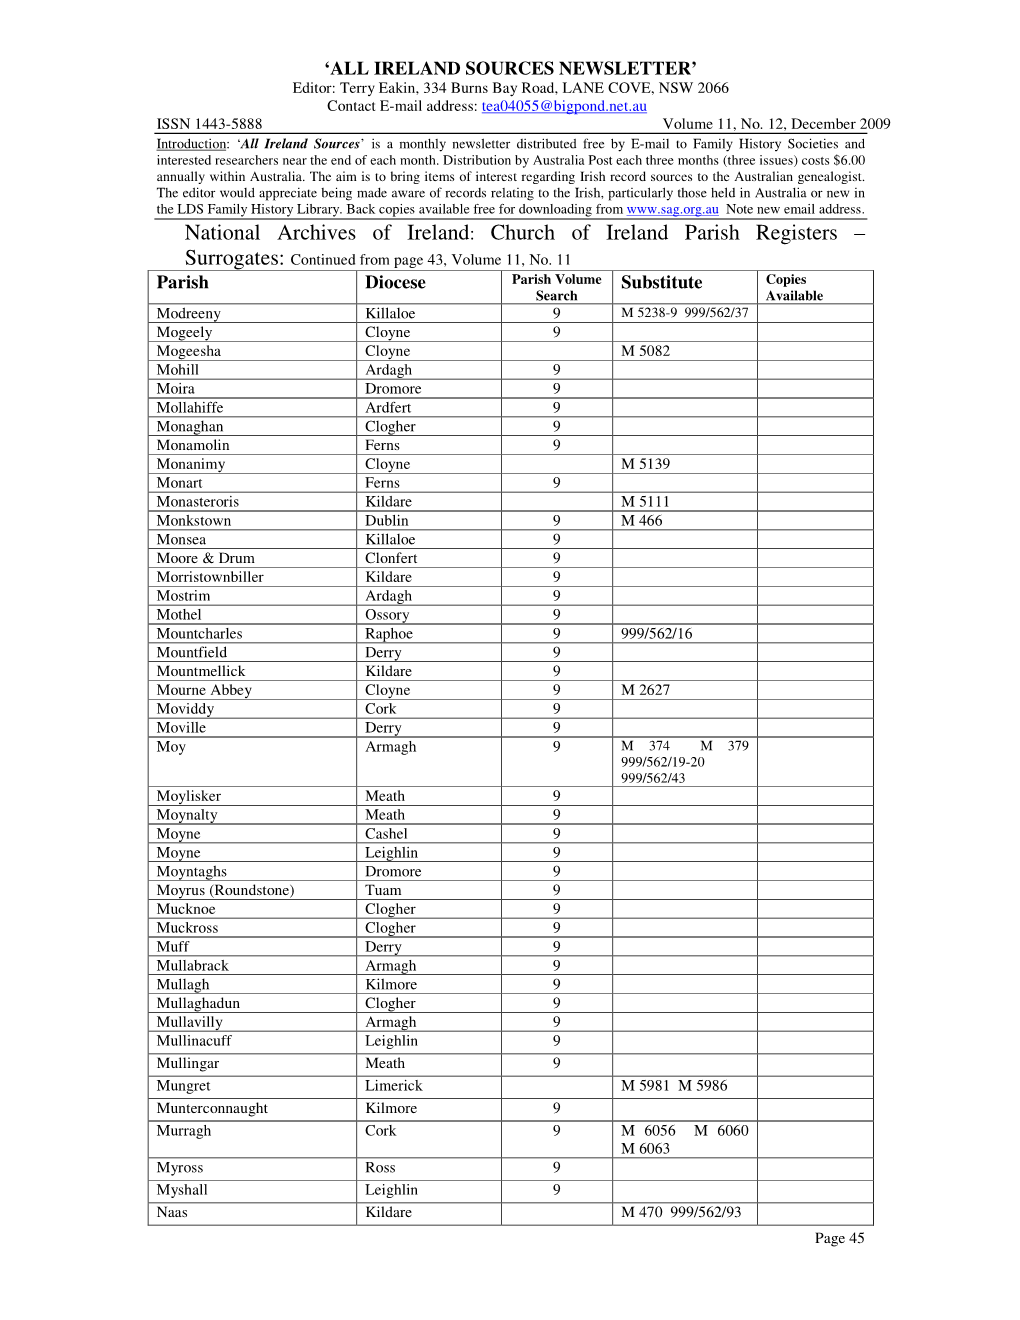 Church of Ireland Parish Registers – Surrogates: Continued from Page 43, Volume 11, No